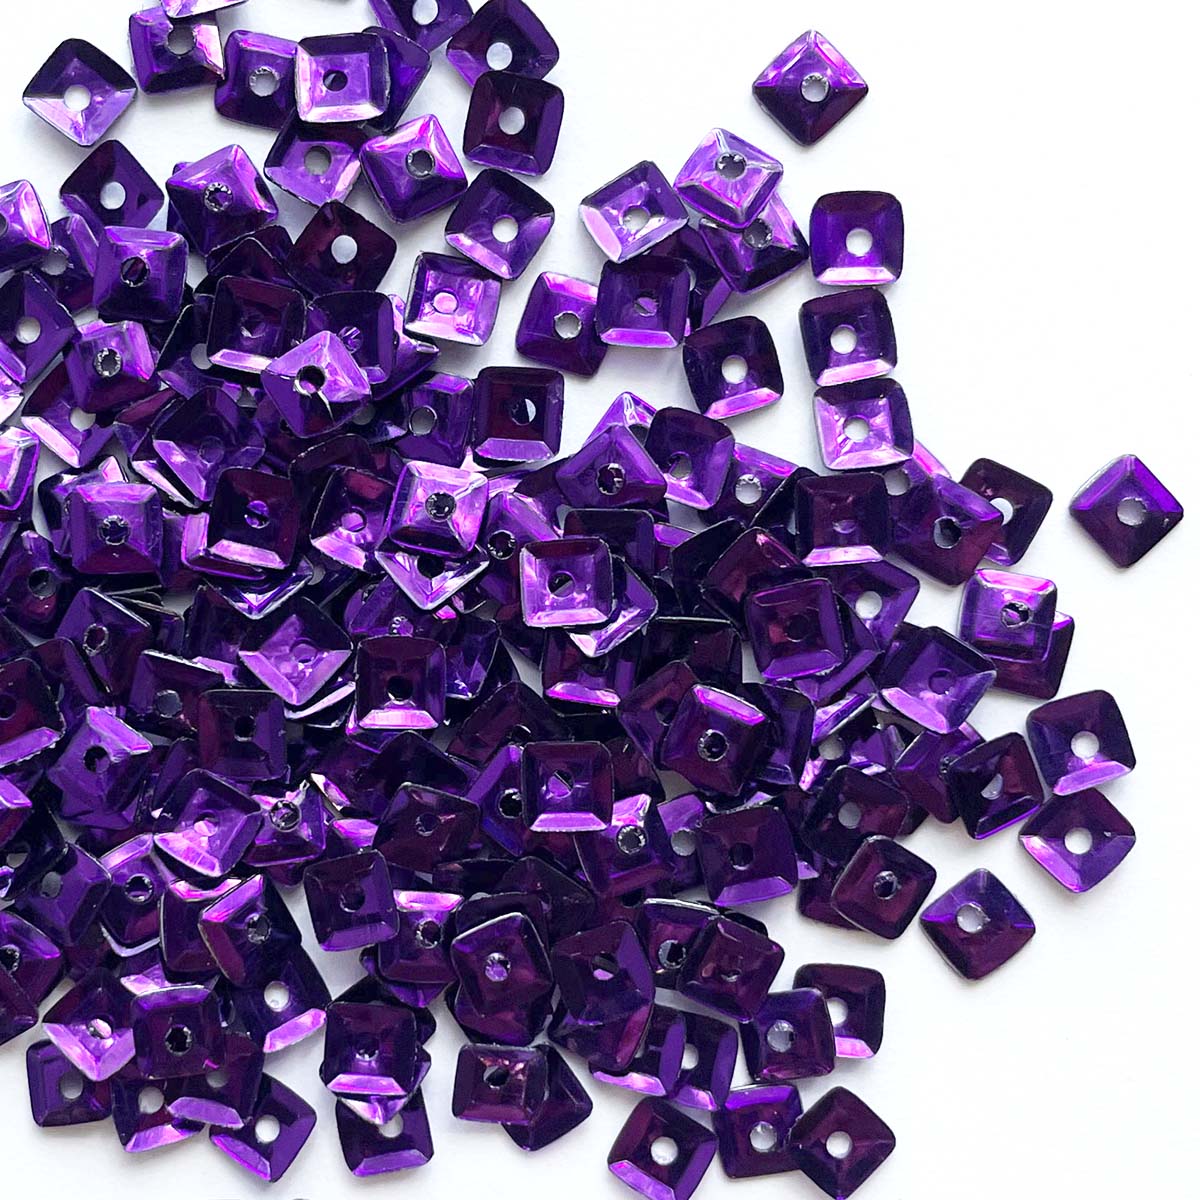 www.colourstreams.com.au Colour Streams Sequins Embellishments Costumes Mardi Gras Dancing Ballet Theatre Shows Drag Queen Bling Stitching Embellishments Australia Canada USA NZ Purple Pyramid Shaped Square  with 2 Holes S225 7mm 